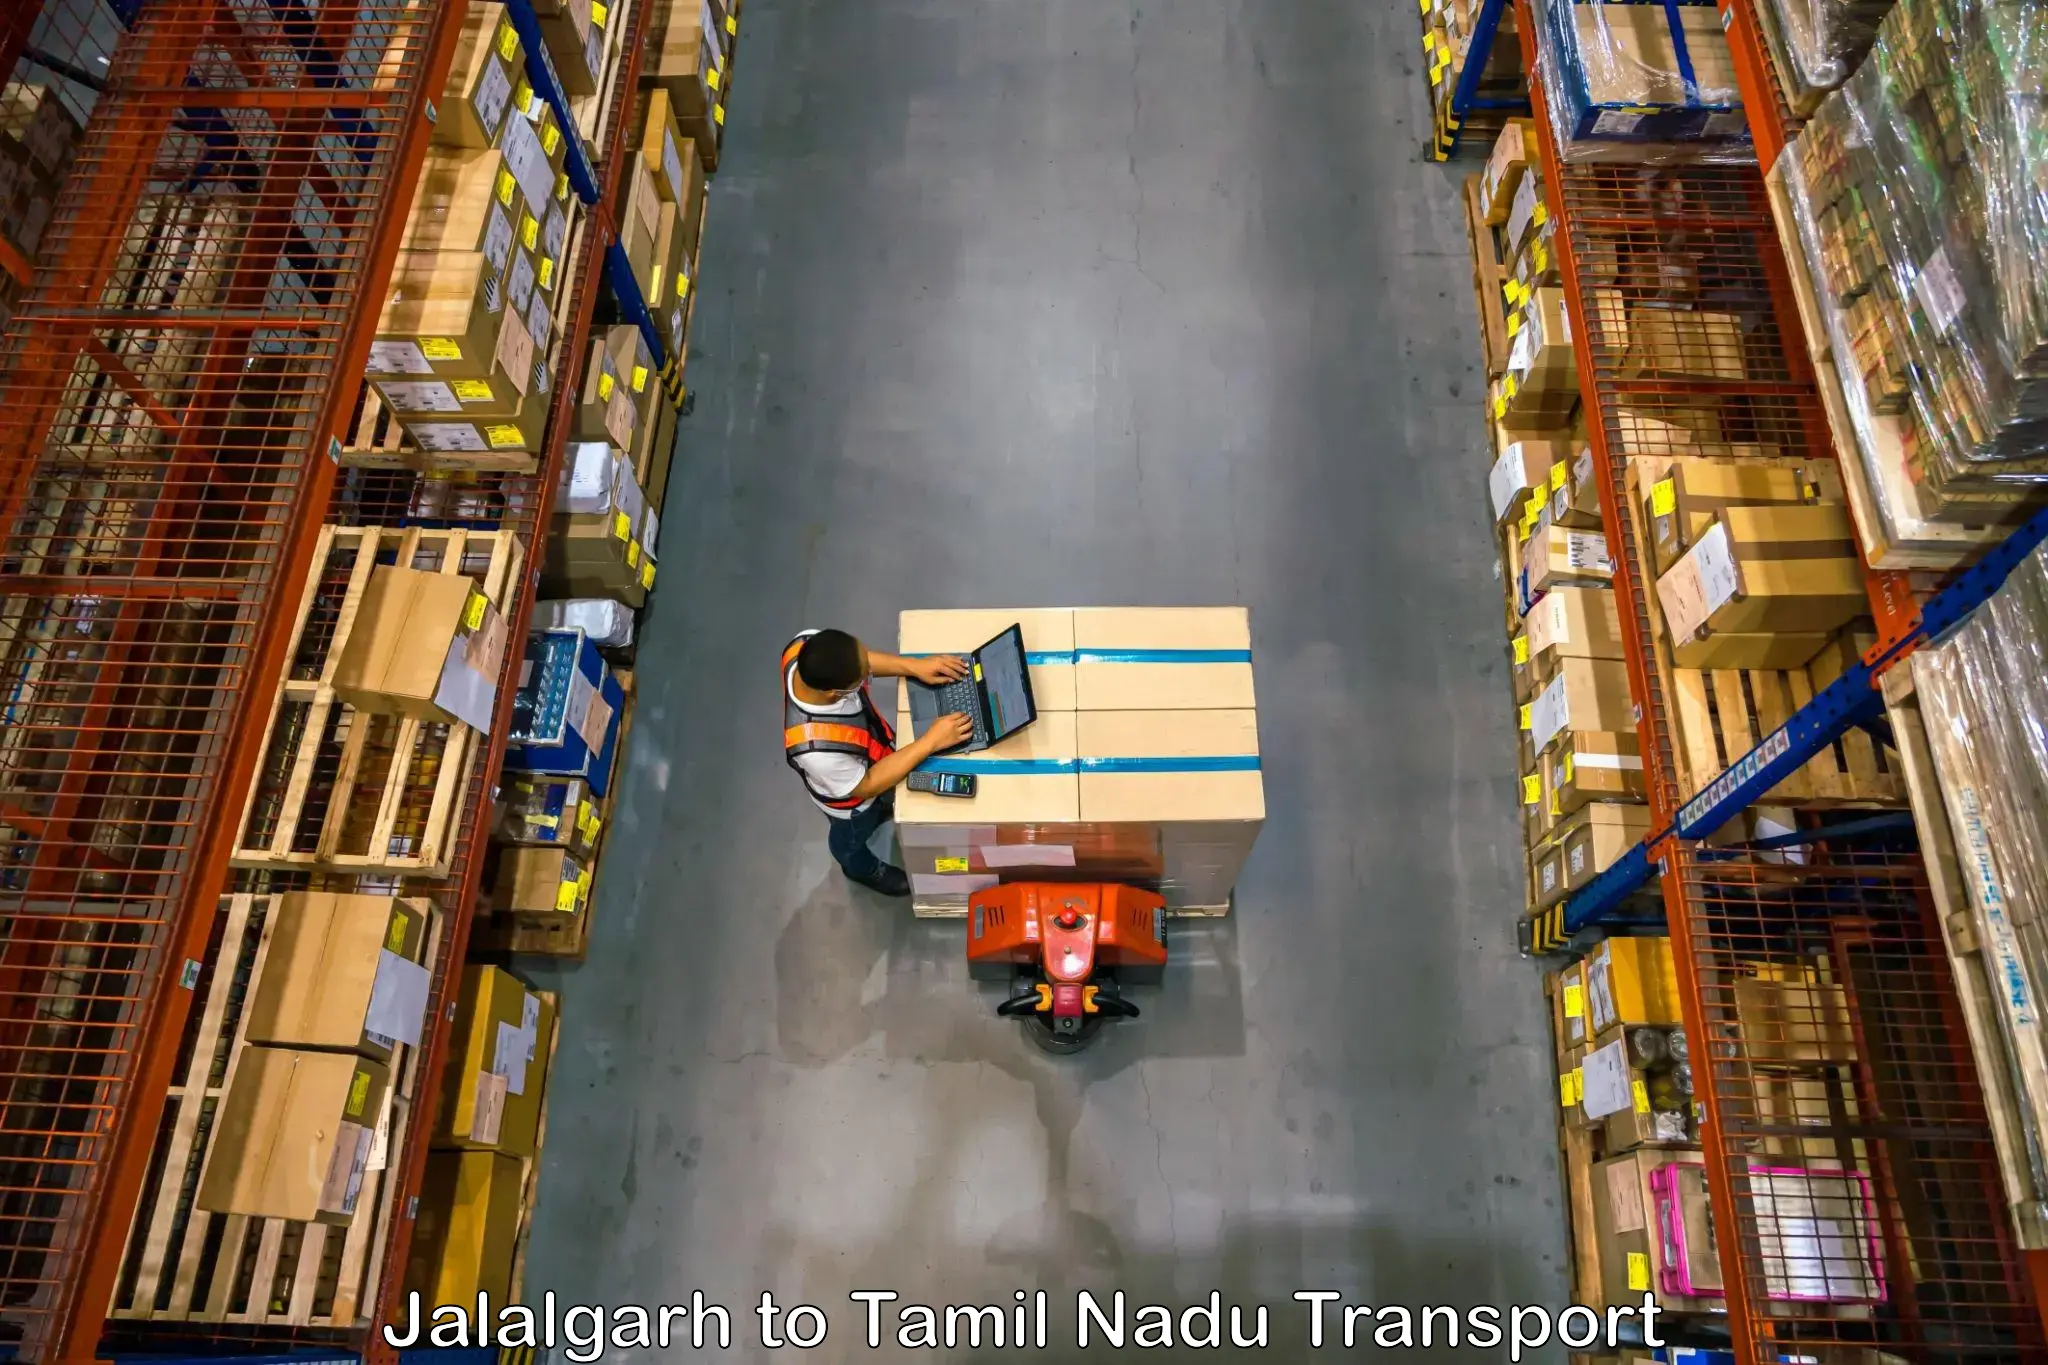 Two wheeler transport services in Jalalgarh to Nagercoil